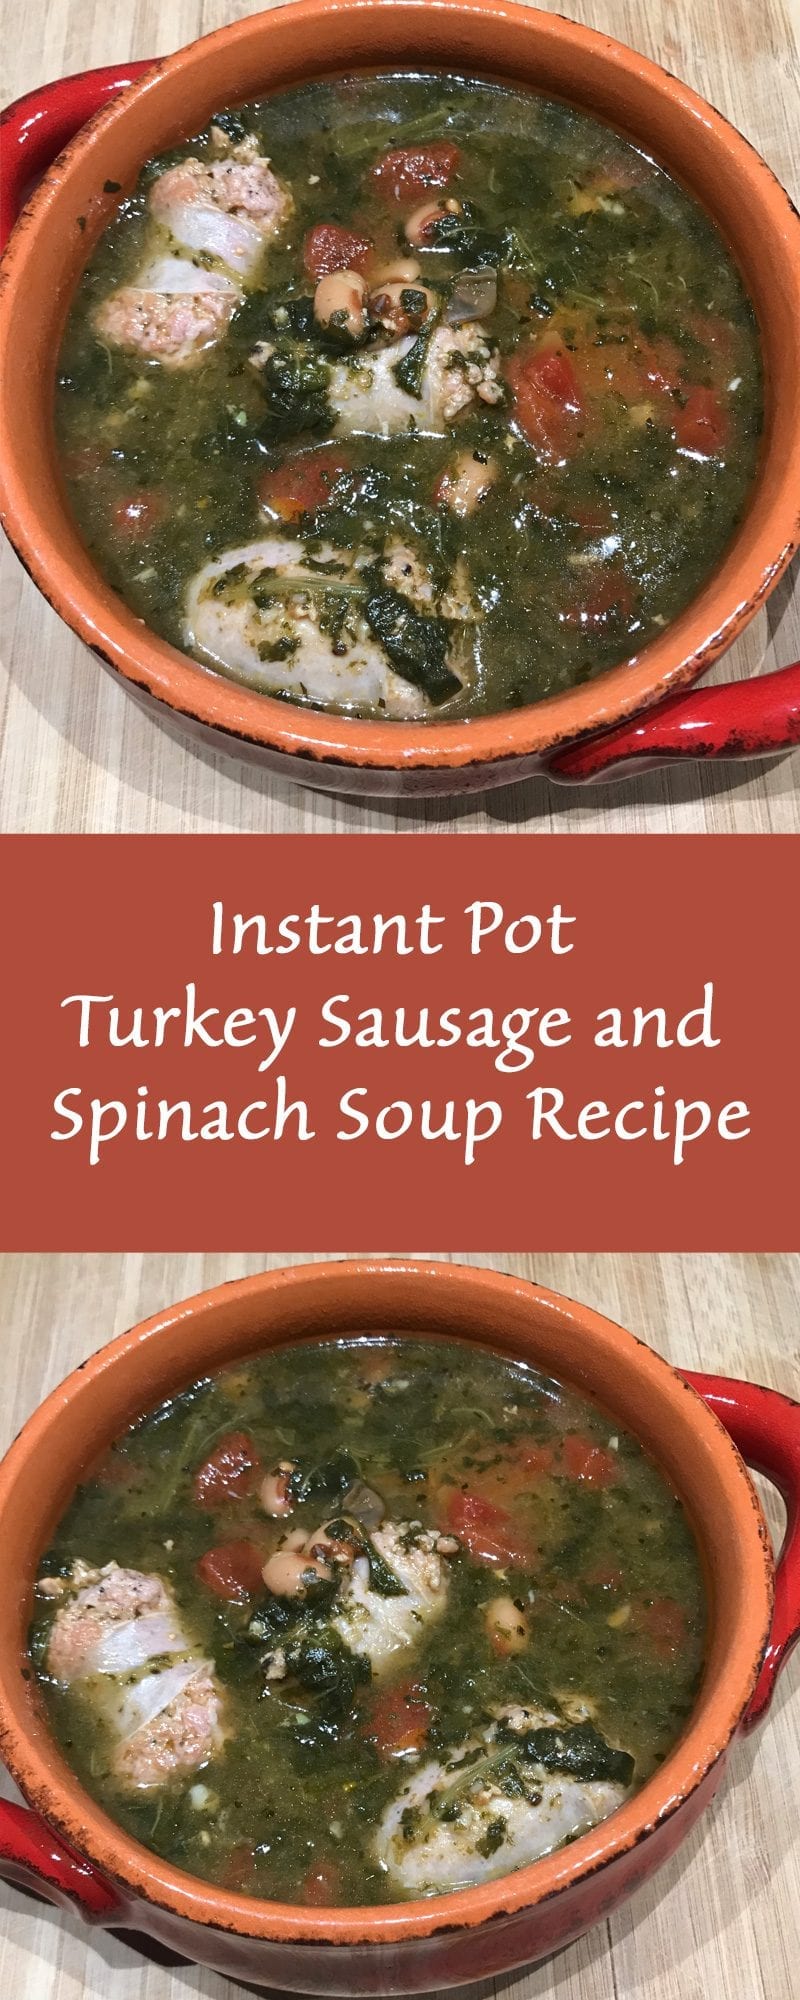 Instant Pot Turkey Sausage and Spinach Soup Recipe